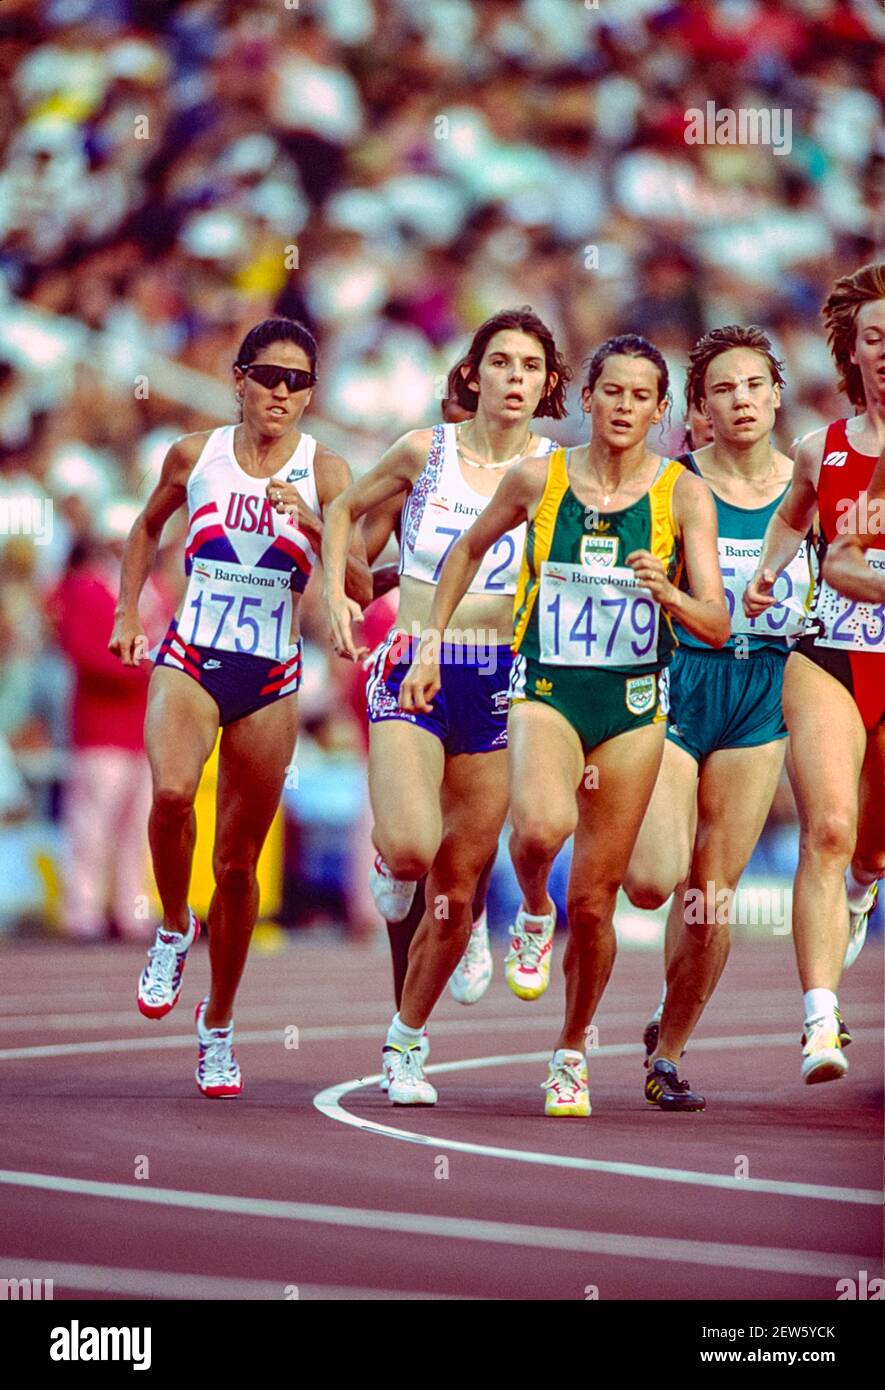 PattiSue Plumer (USA) #1751  Zola Pieterse (née Budd) RSA #1479 competing in th Women's 3,000m Ht#1 at the 1992 Olympic Summer Games. Stock Photo